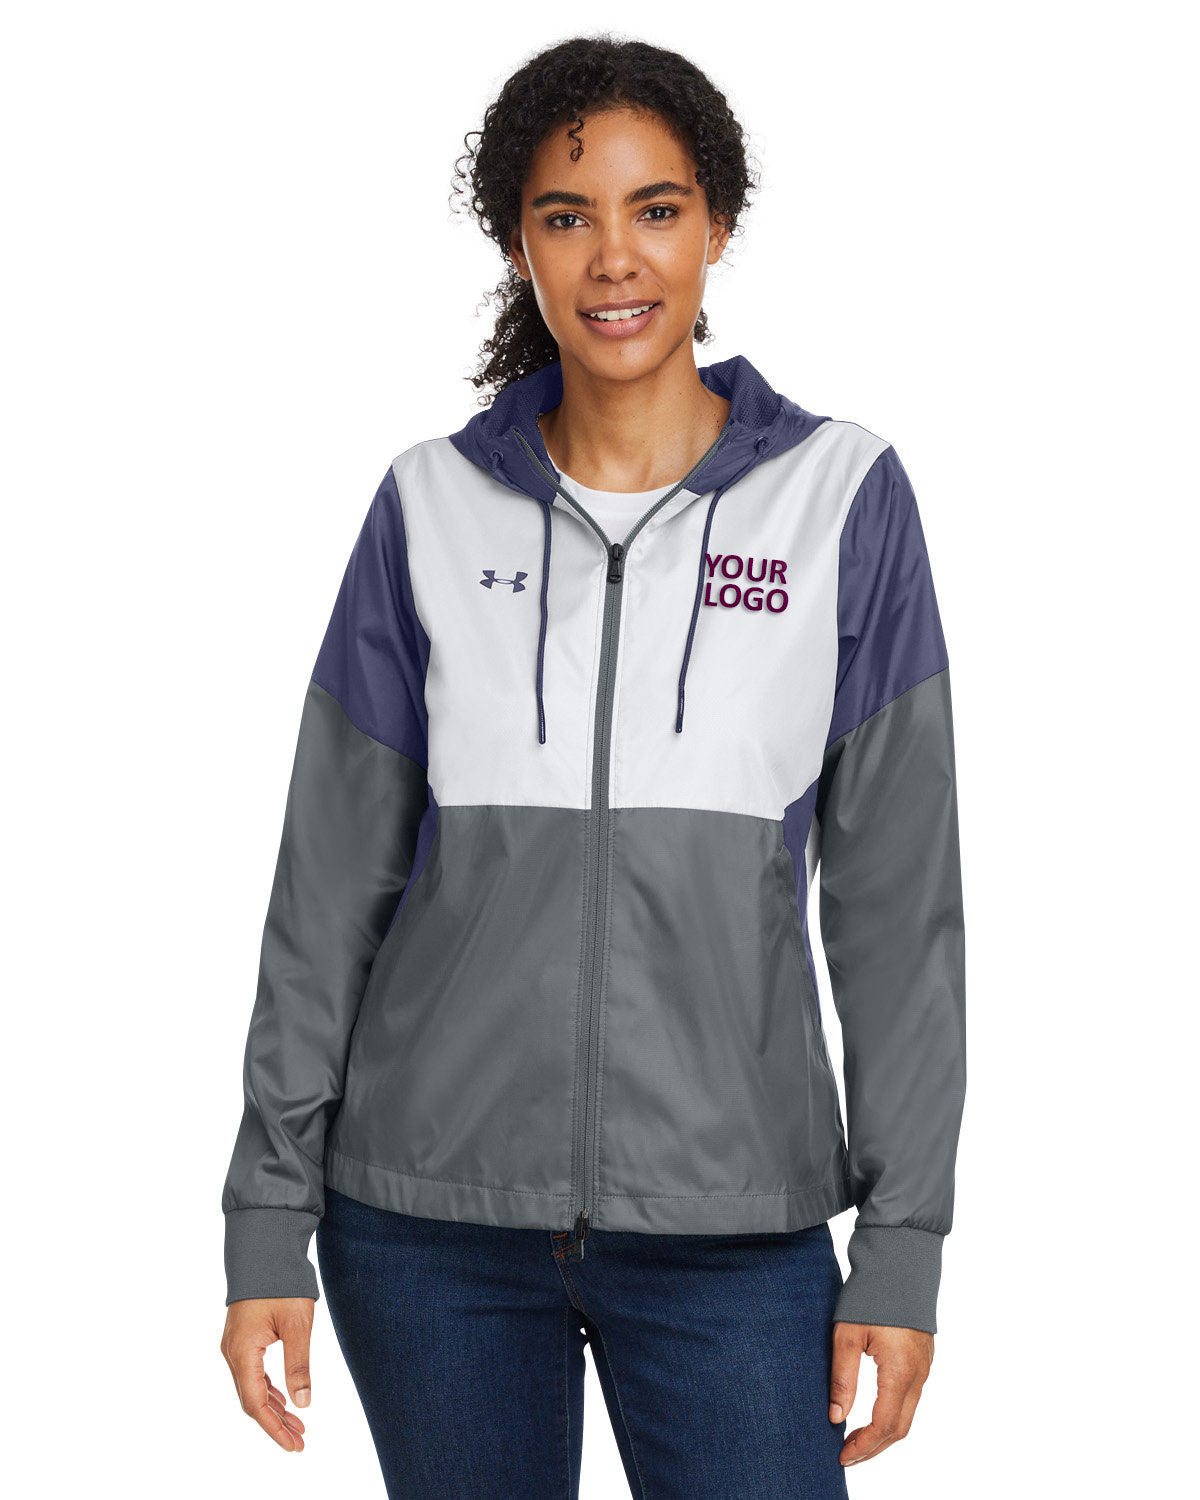 Under Armour Ladies Team Legacy Branded Jackets, Navy